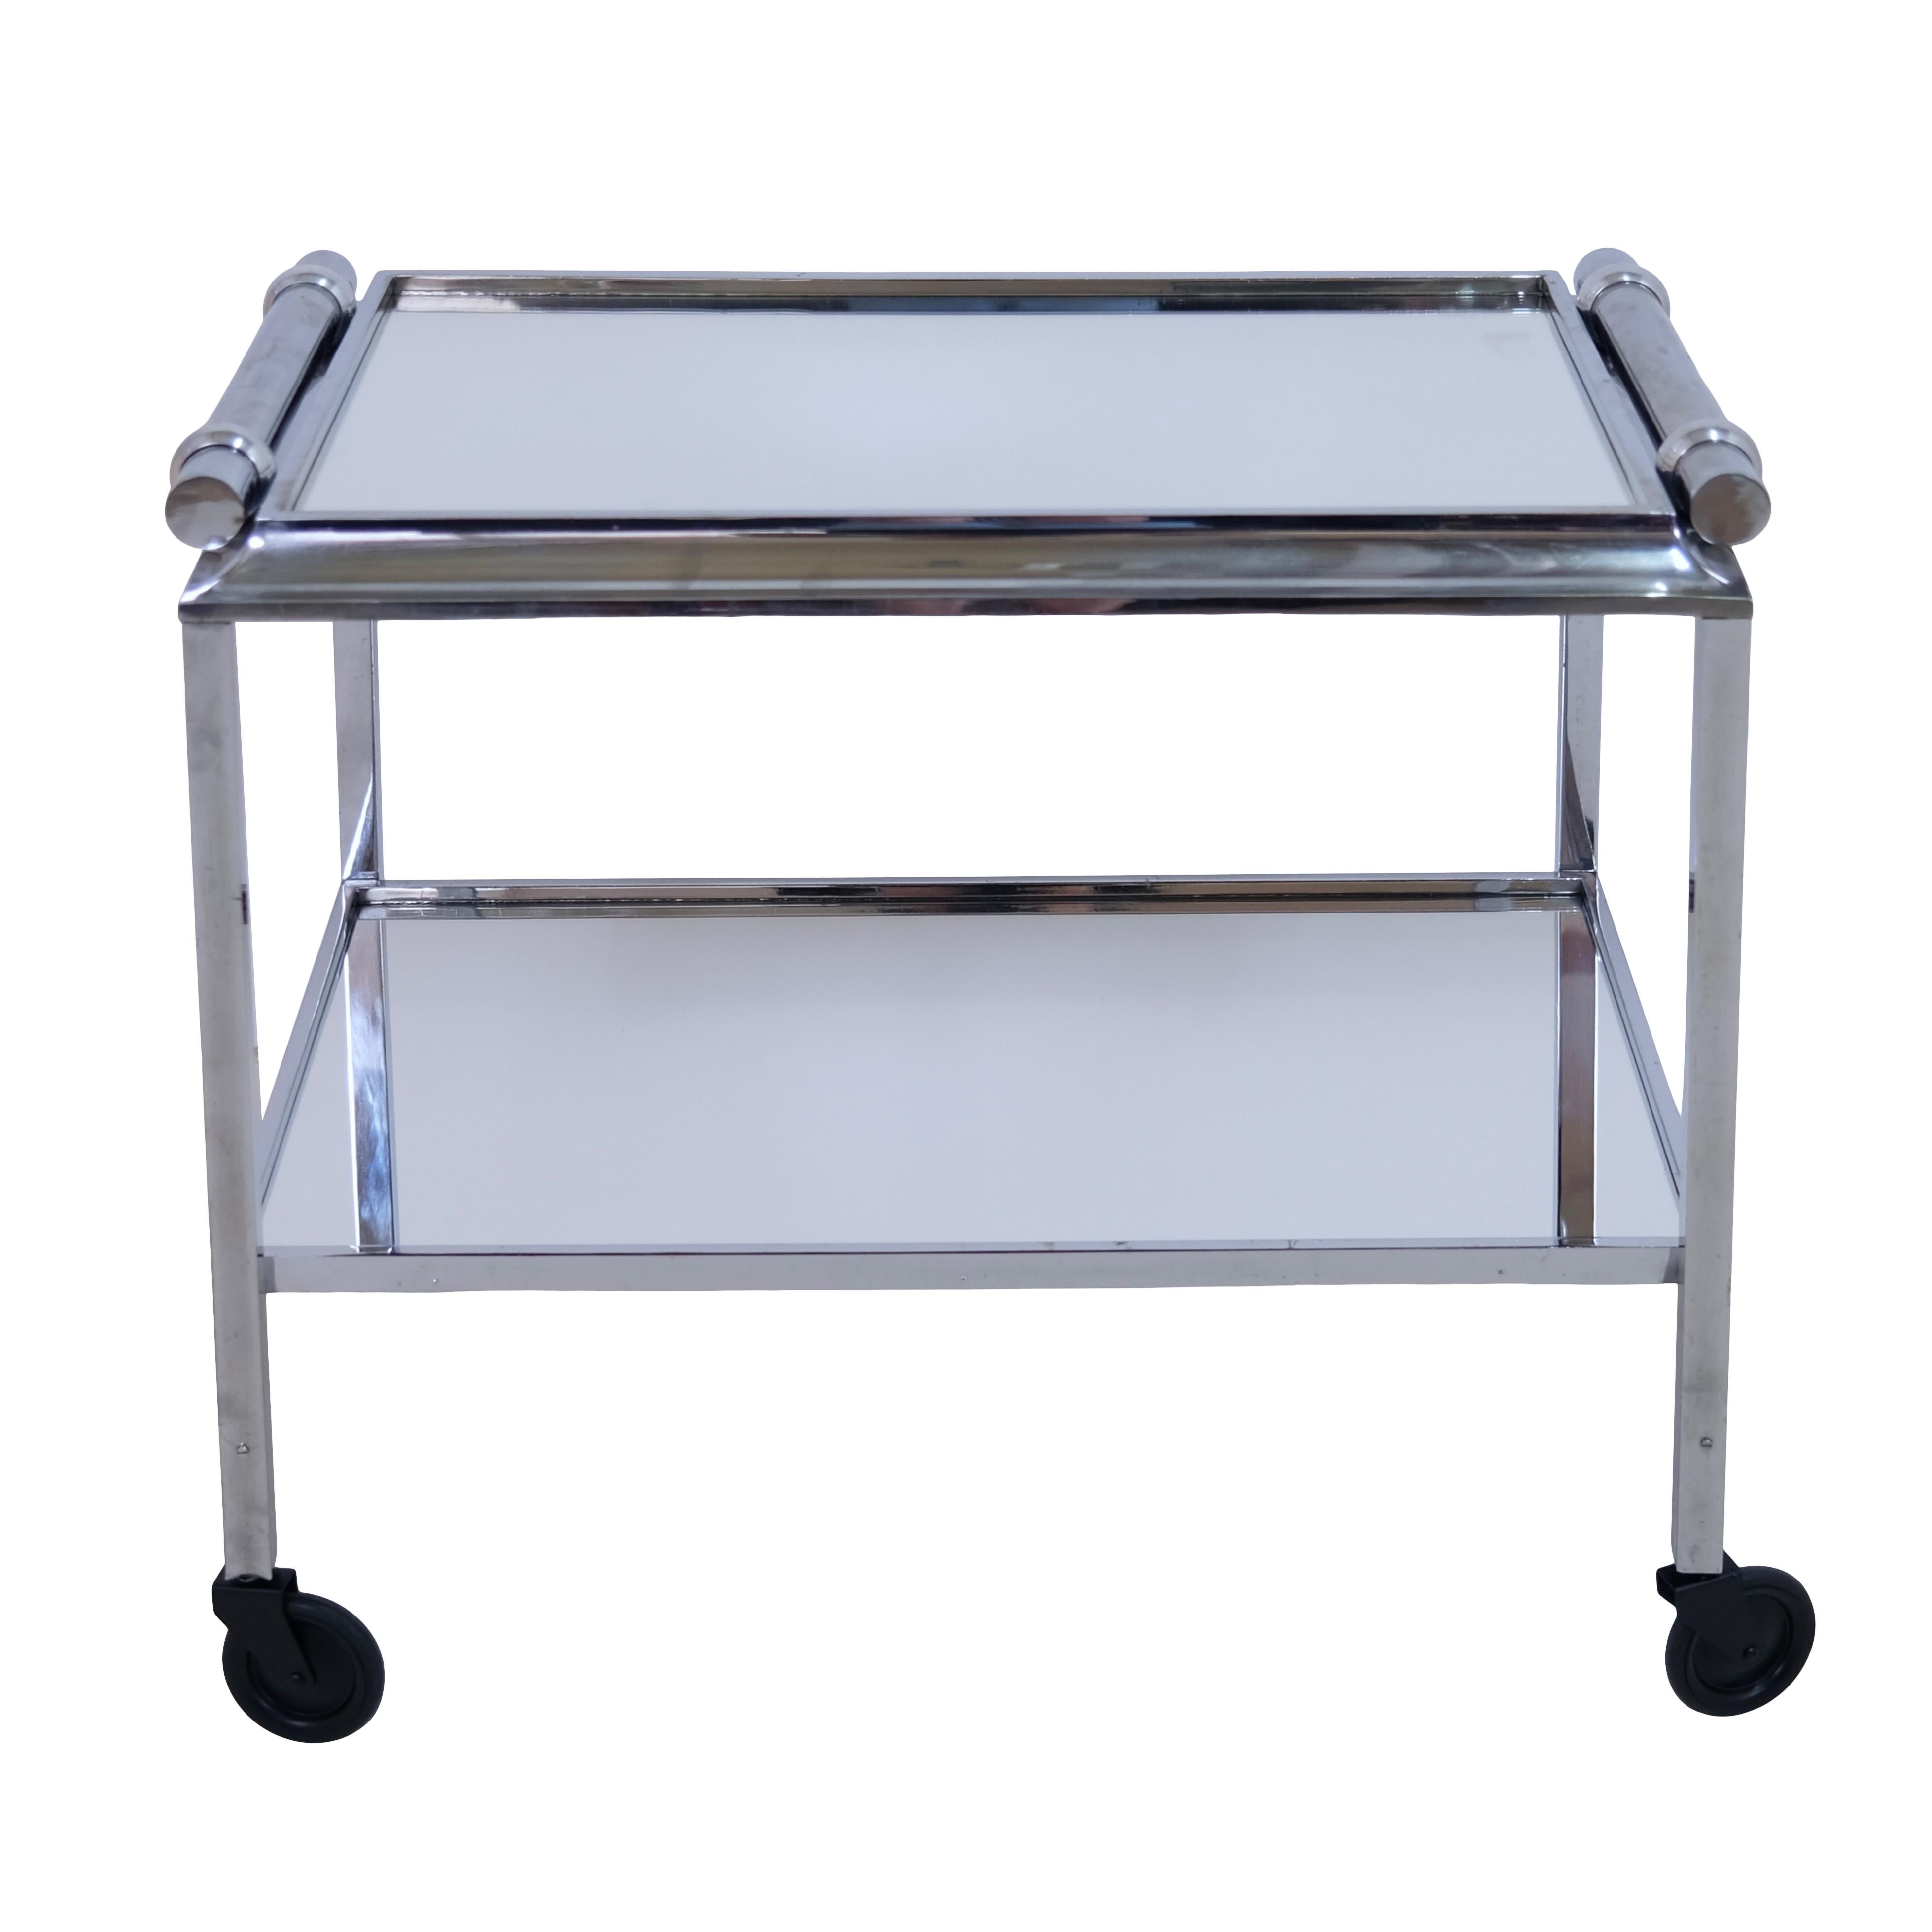 Polished 1930's Modernist Chromed Art Deco Bar Cart with Mirrors and Cylindrical Handles For Sale